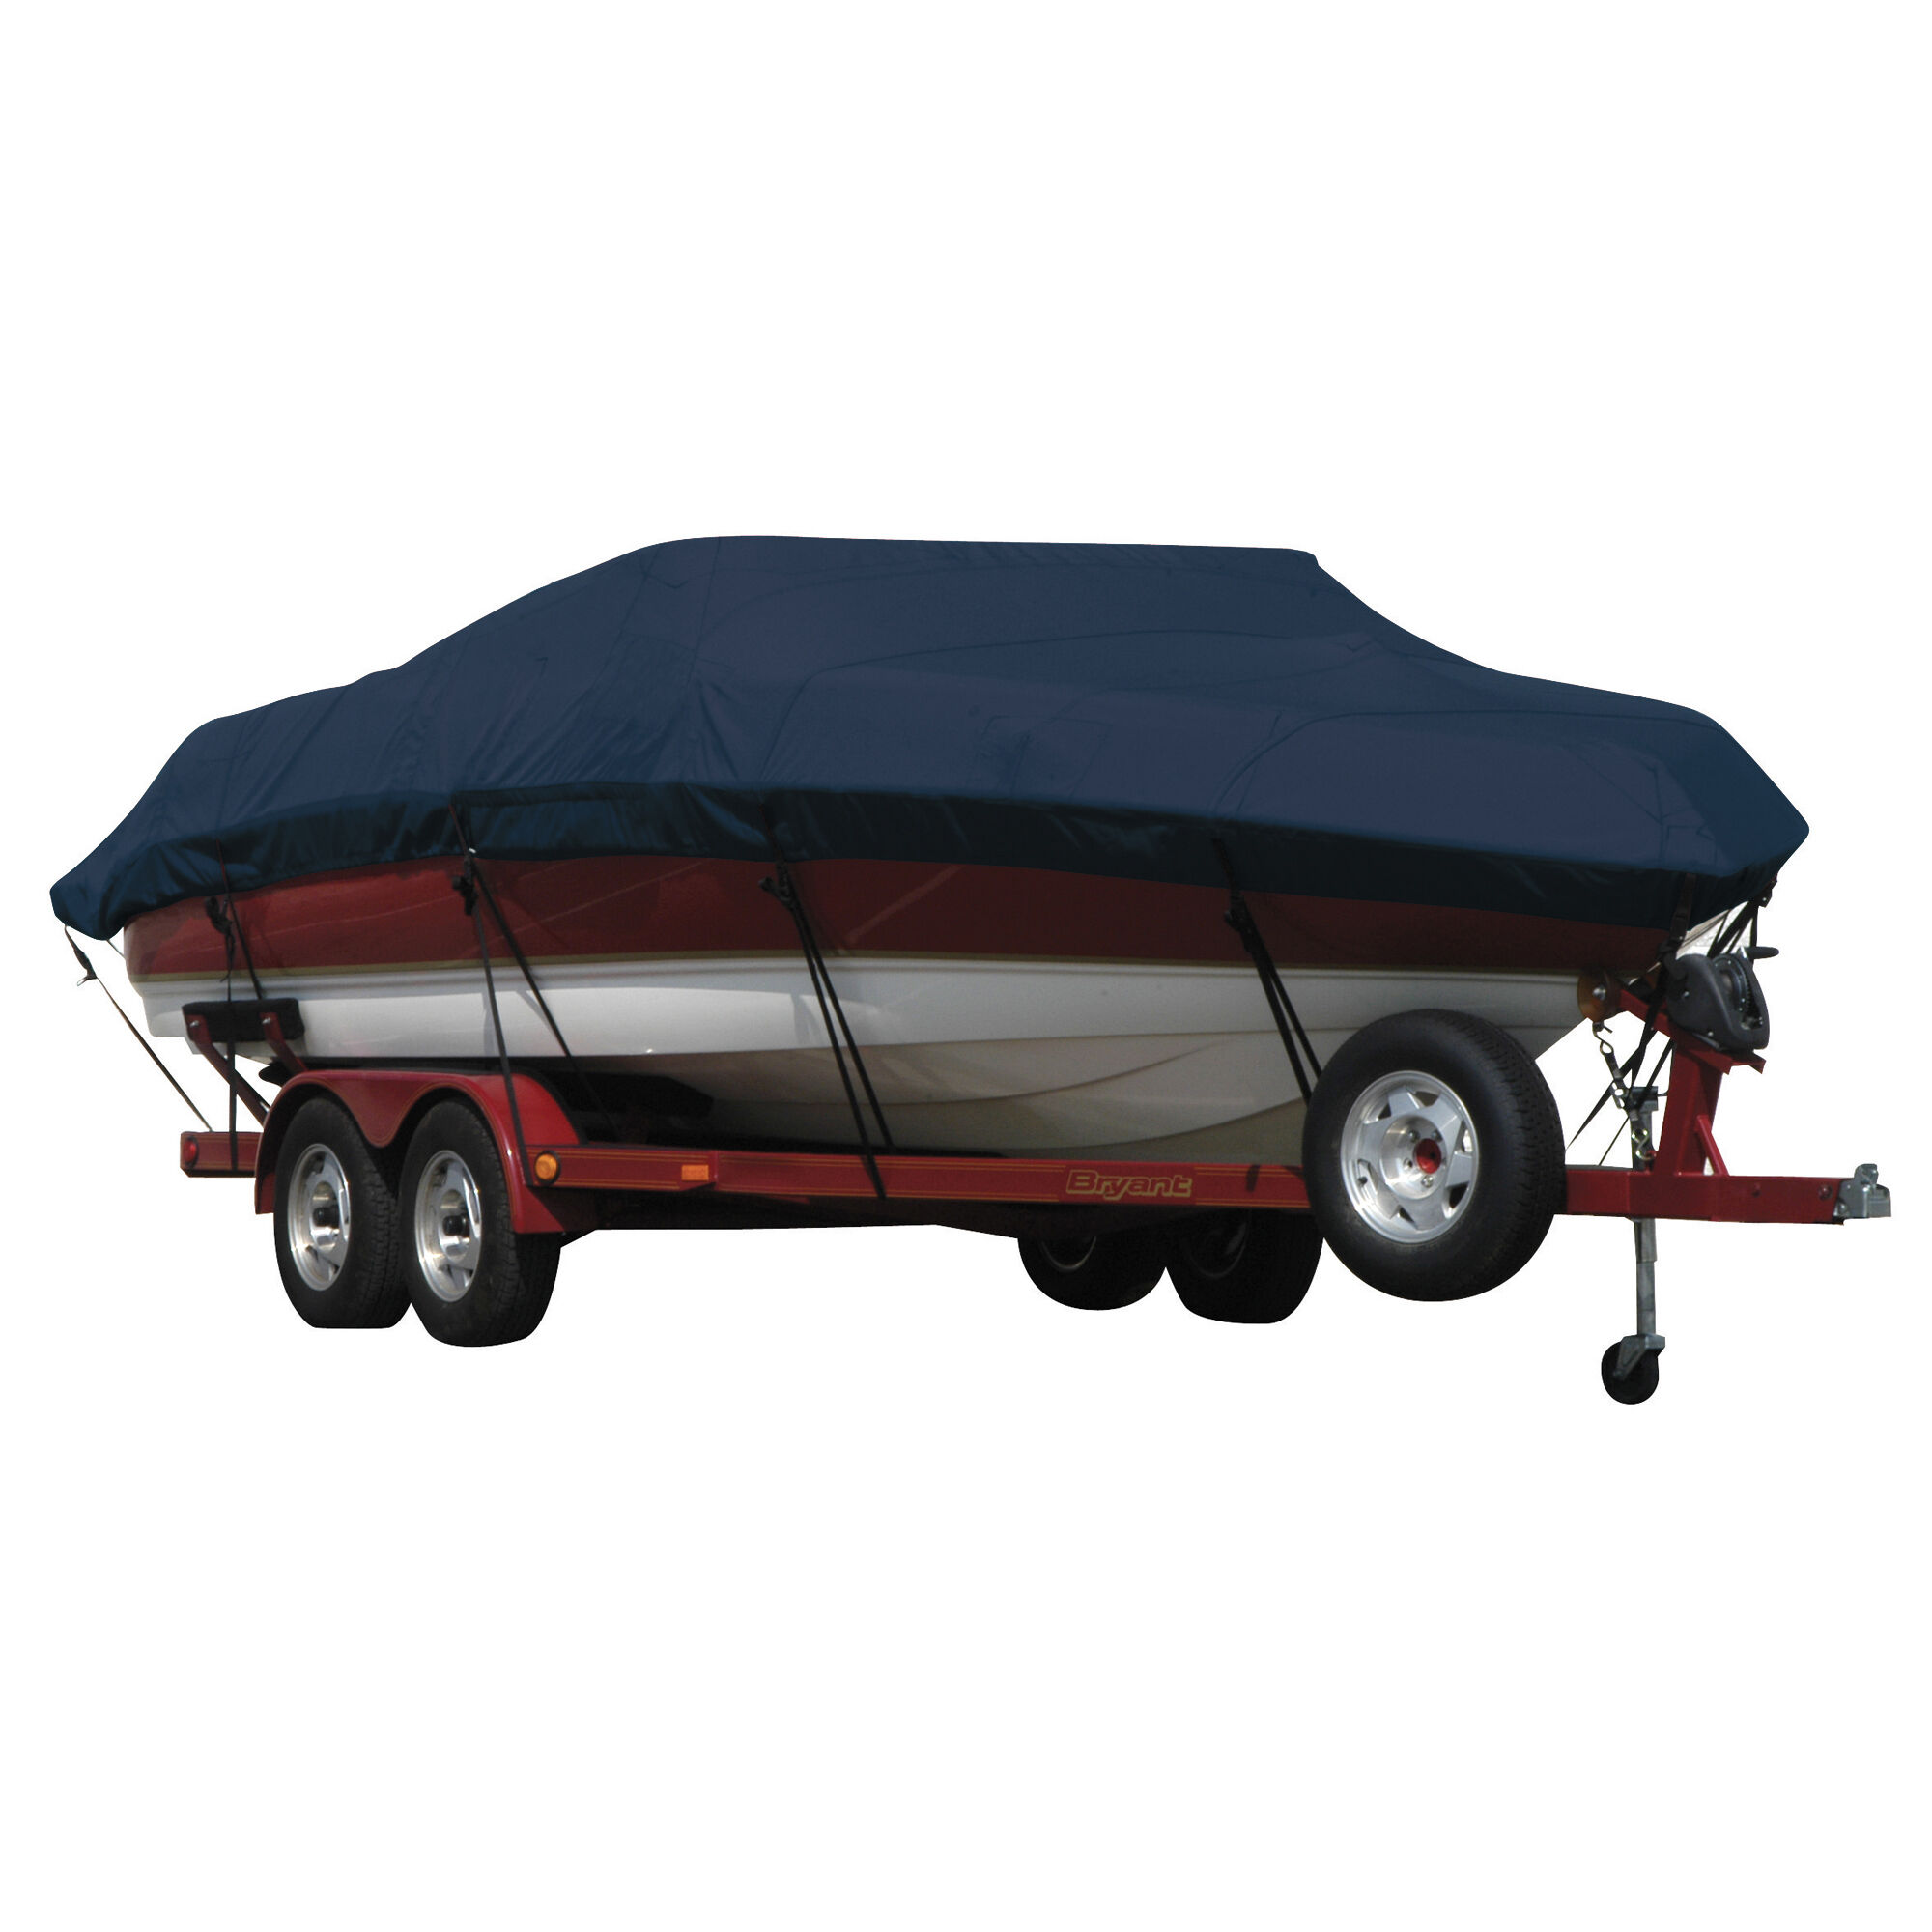 Covermate Exact Fit Sunbrella Boat Cover for Ski Centurion V-C4 V-C4 w/ Proflight G Force Tower Does Not Cover PLATFORMm I/O. Navy in